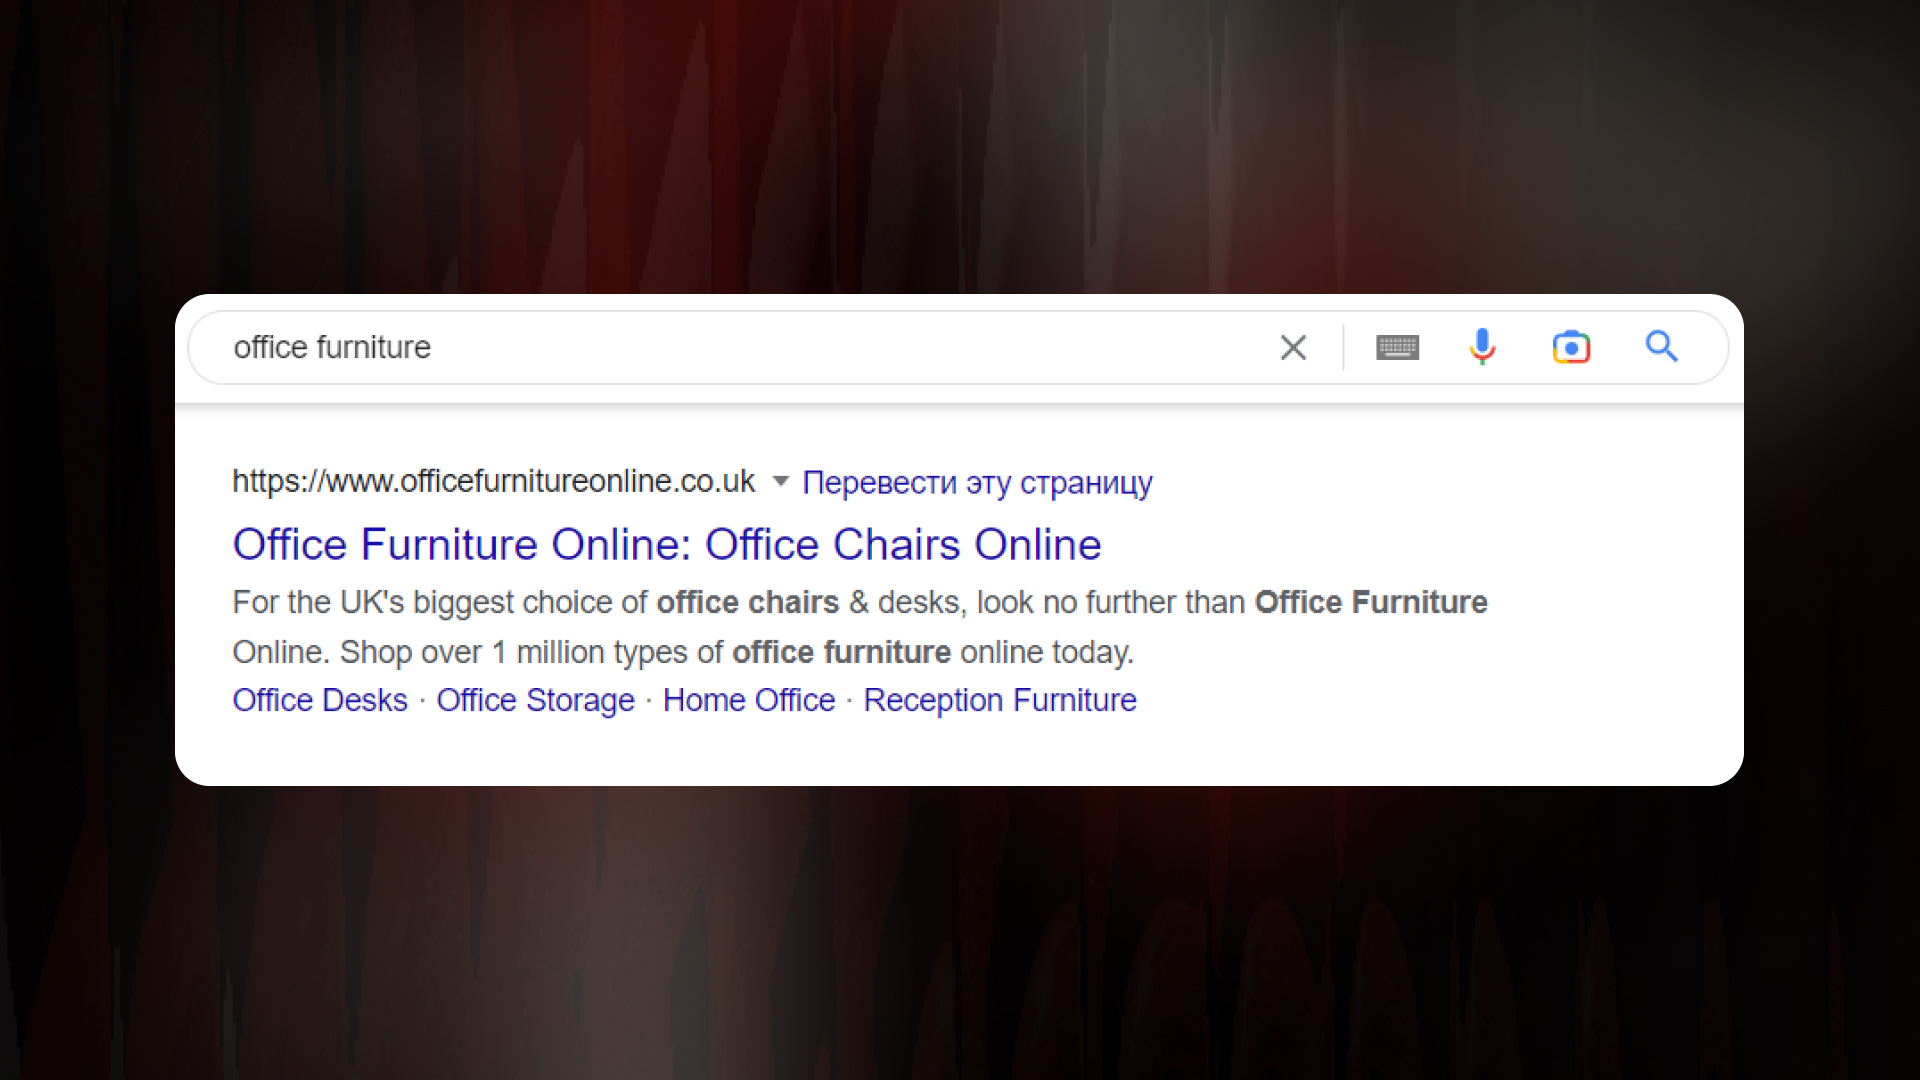 Keyword "office furniture" in the domain